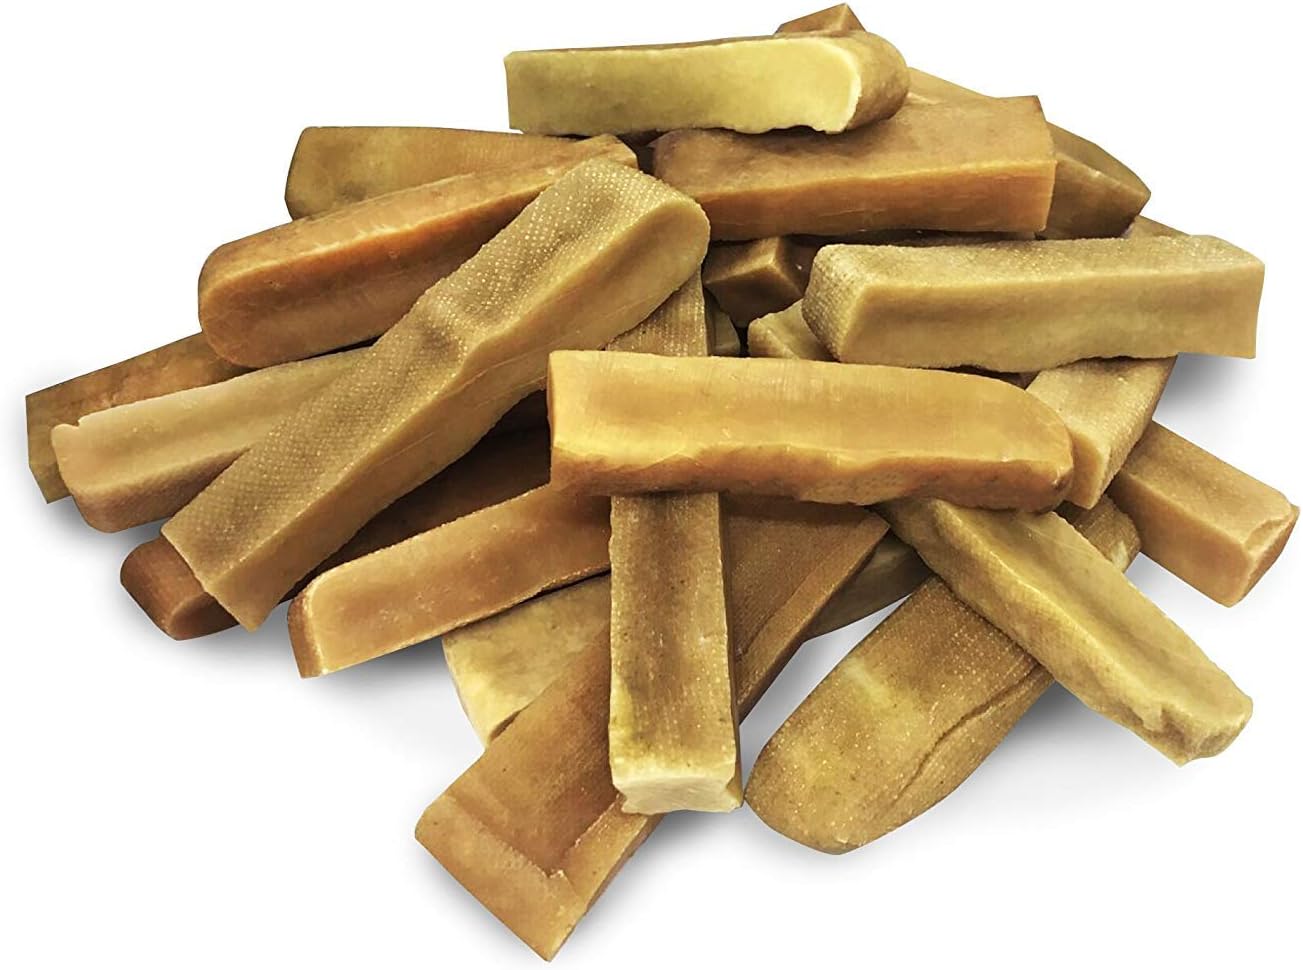 EcoKind Pet Treats Gold Himalayan Yak Cheese Dog Chew, Yak Dog Treats for Active Chewers, 100% Natural & Healthy Chew Sticks for Small & Large Dogs, Assorted Set of Big & Small Yak Chews (4 Sticks) : Pet Supplies